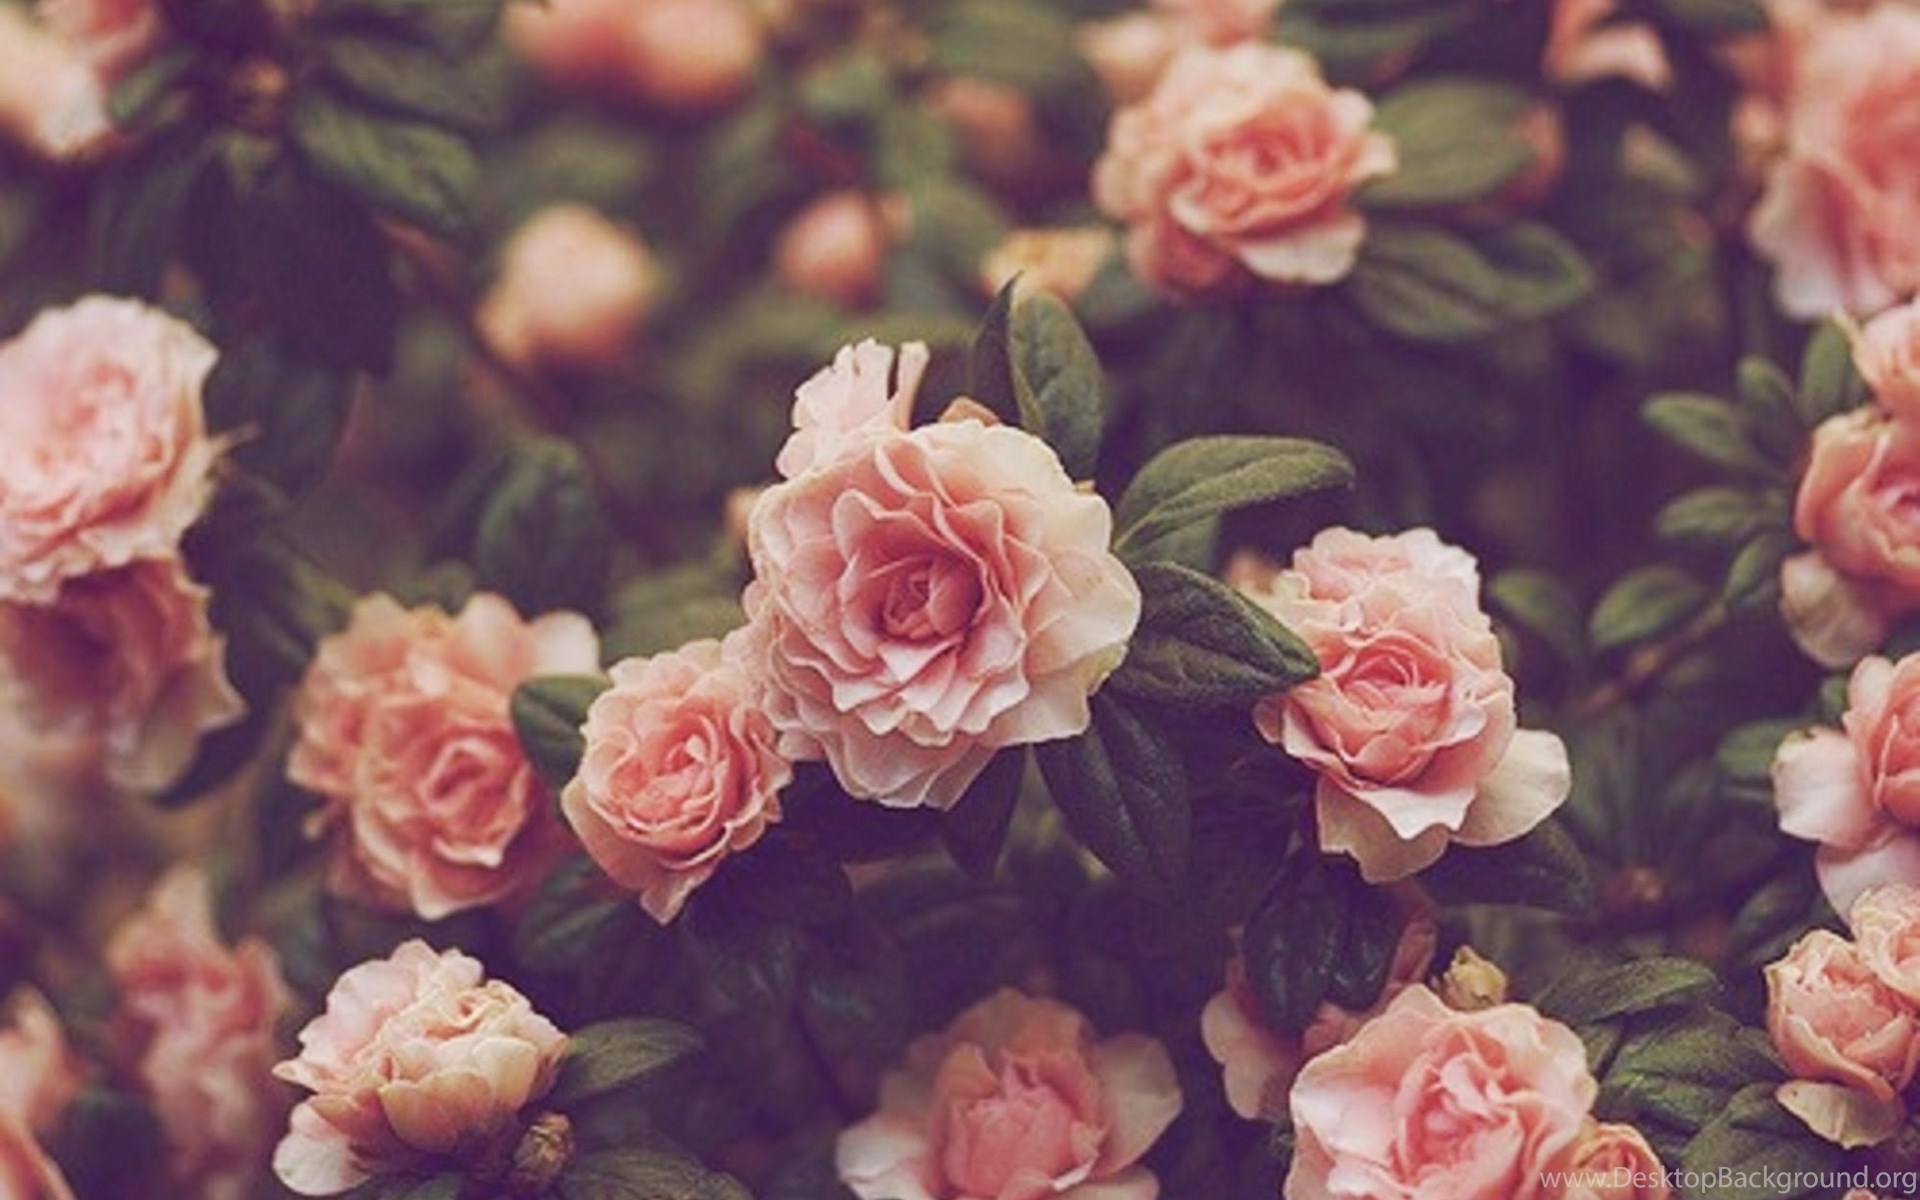 Rose Gold Background Hd Tumblr Wallpaper space wallpaper fur desktop galaxy wallpaper wallpaper for computer wallpaper iphone disney cute laptop wallpaper tumblr wallpaper wallpaper backgrounds. red roses image blogger